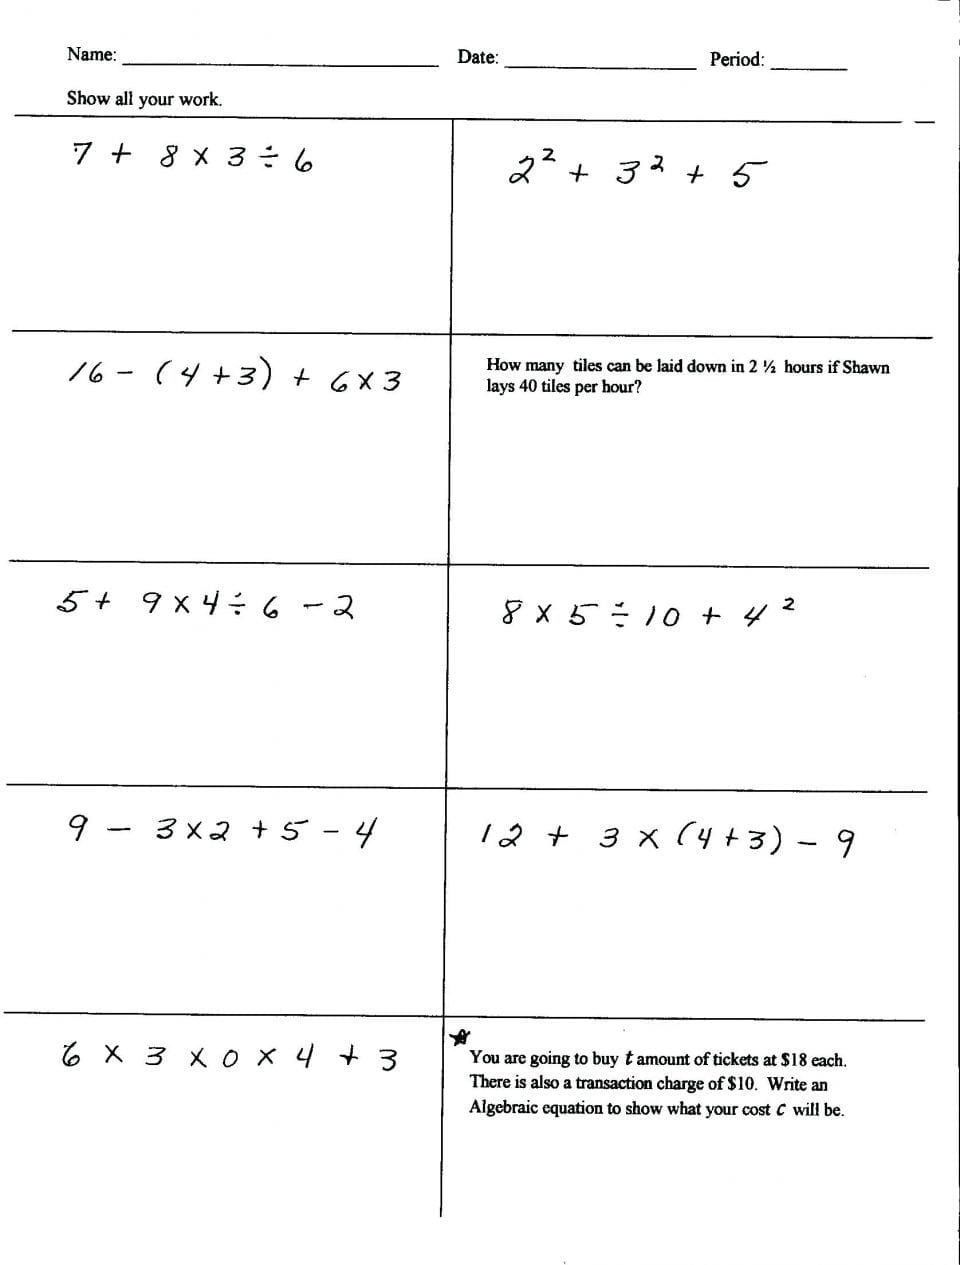 5th-grade-math-order-of-operations-worksheets-unique-8th-db-excel